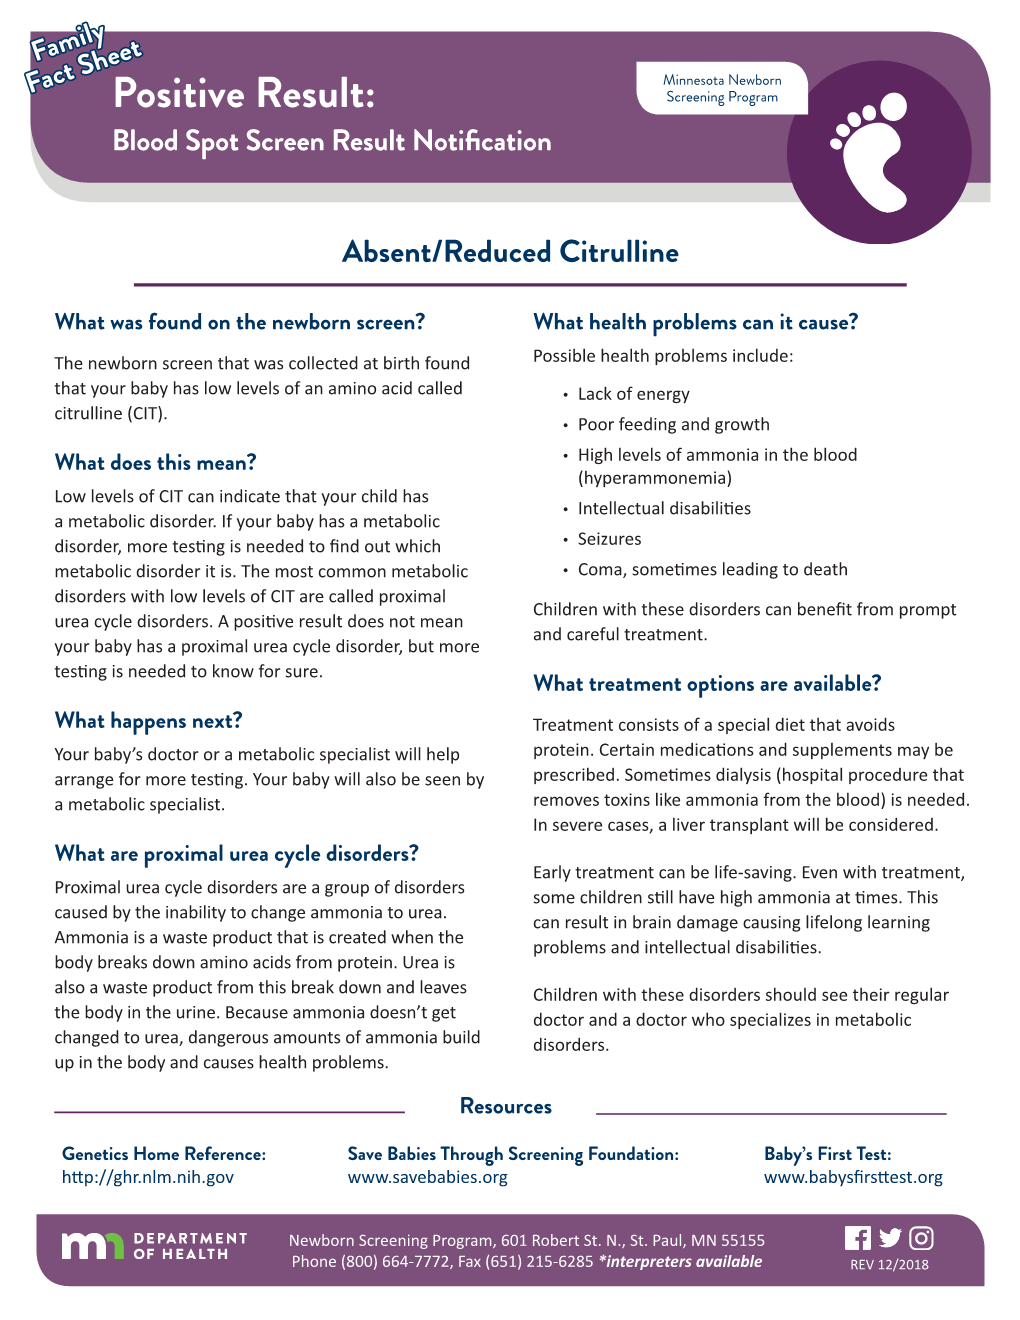 Absent/Reduced Citrulline Family Fact Sheet